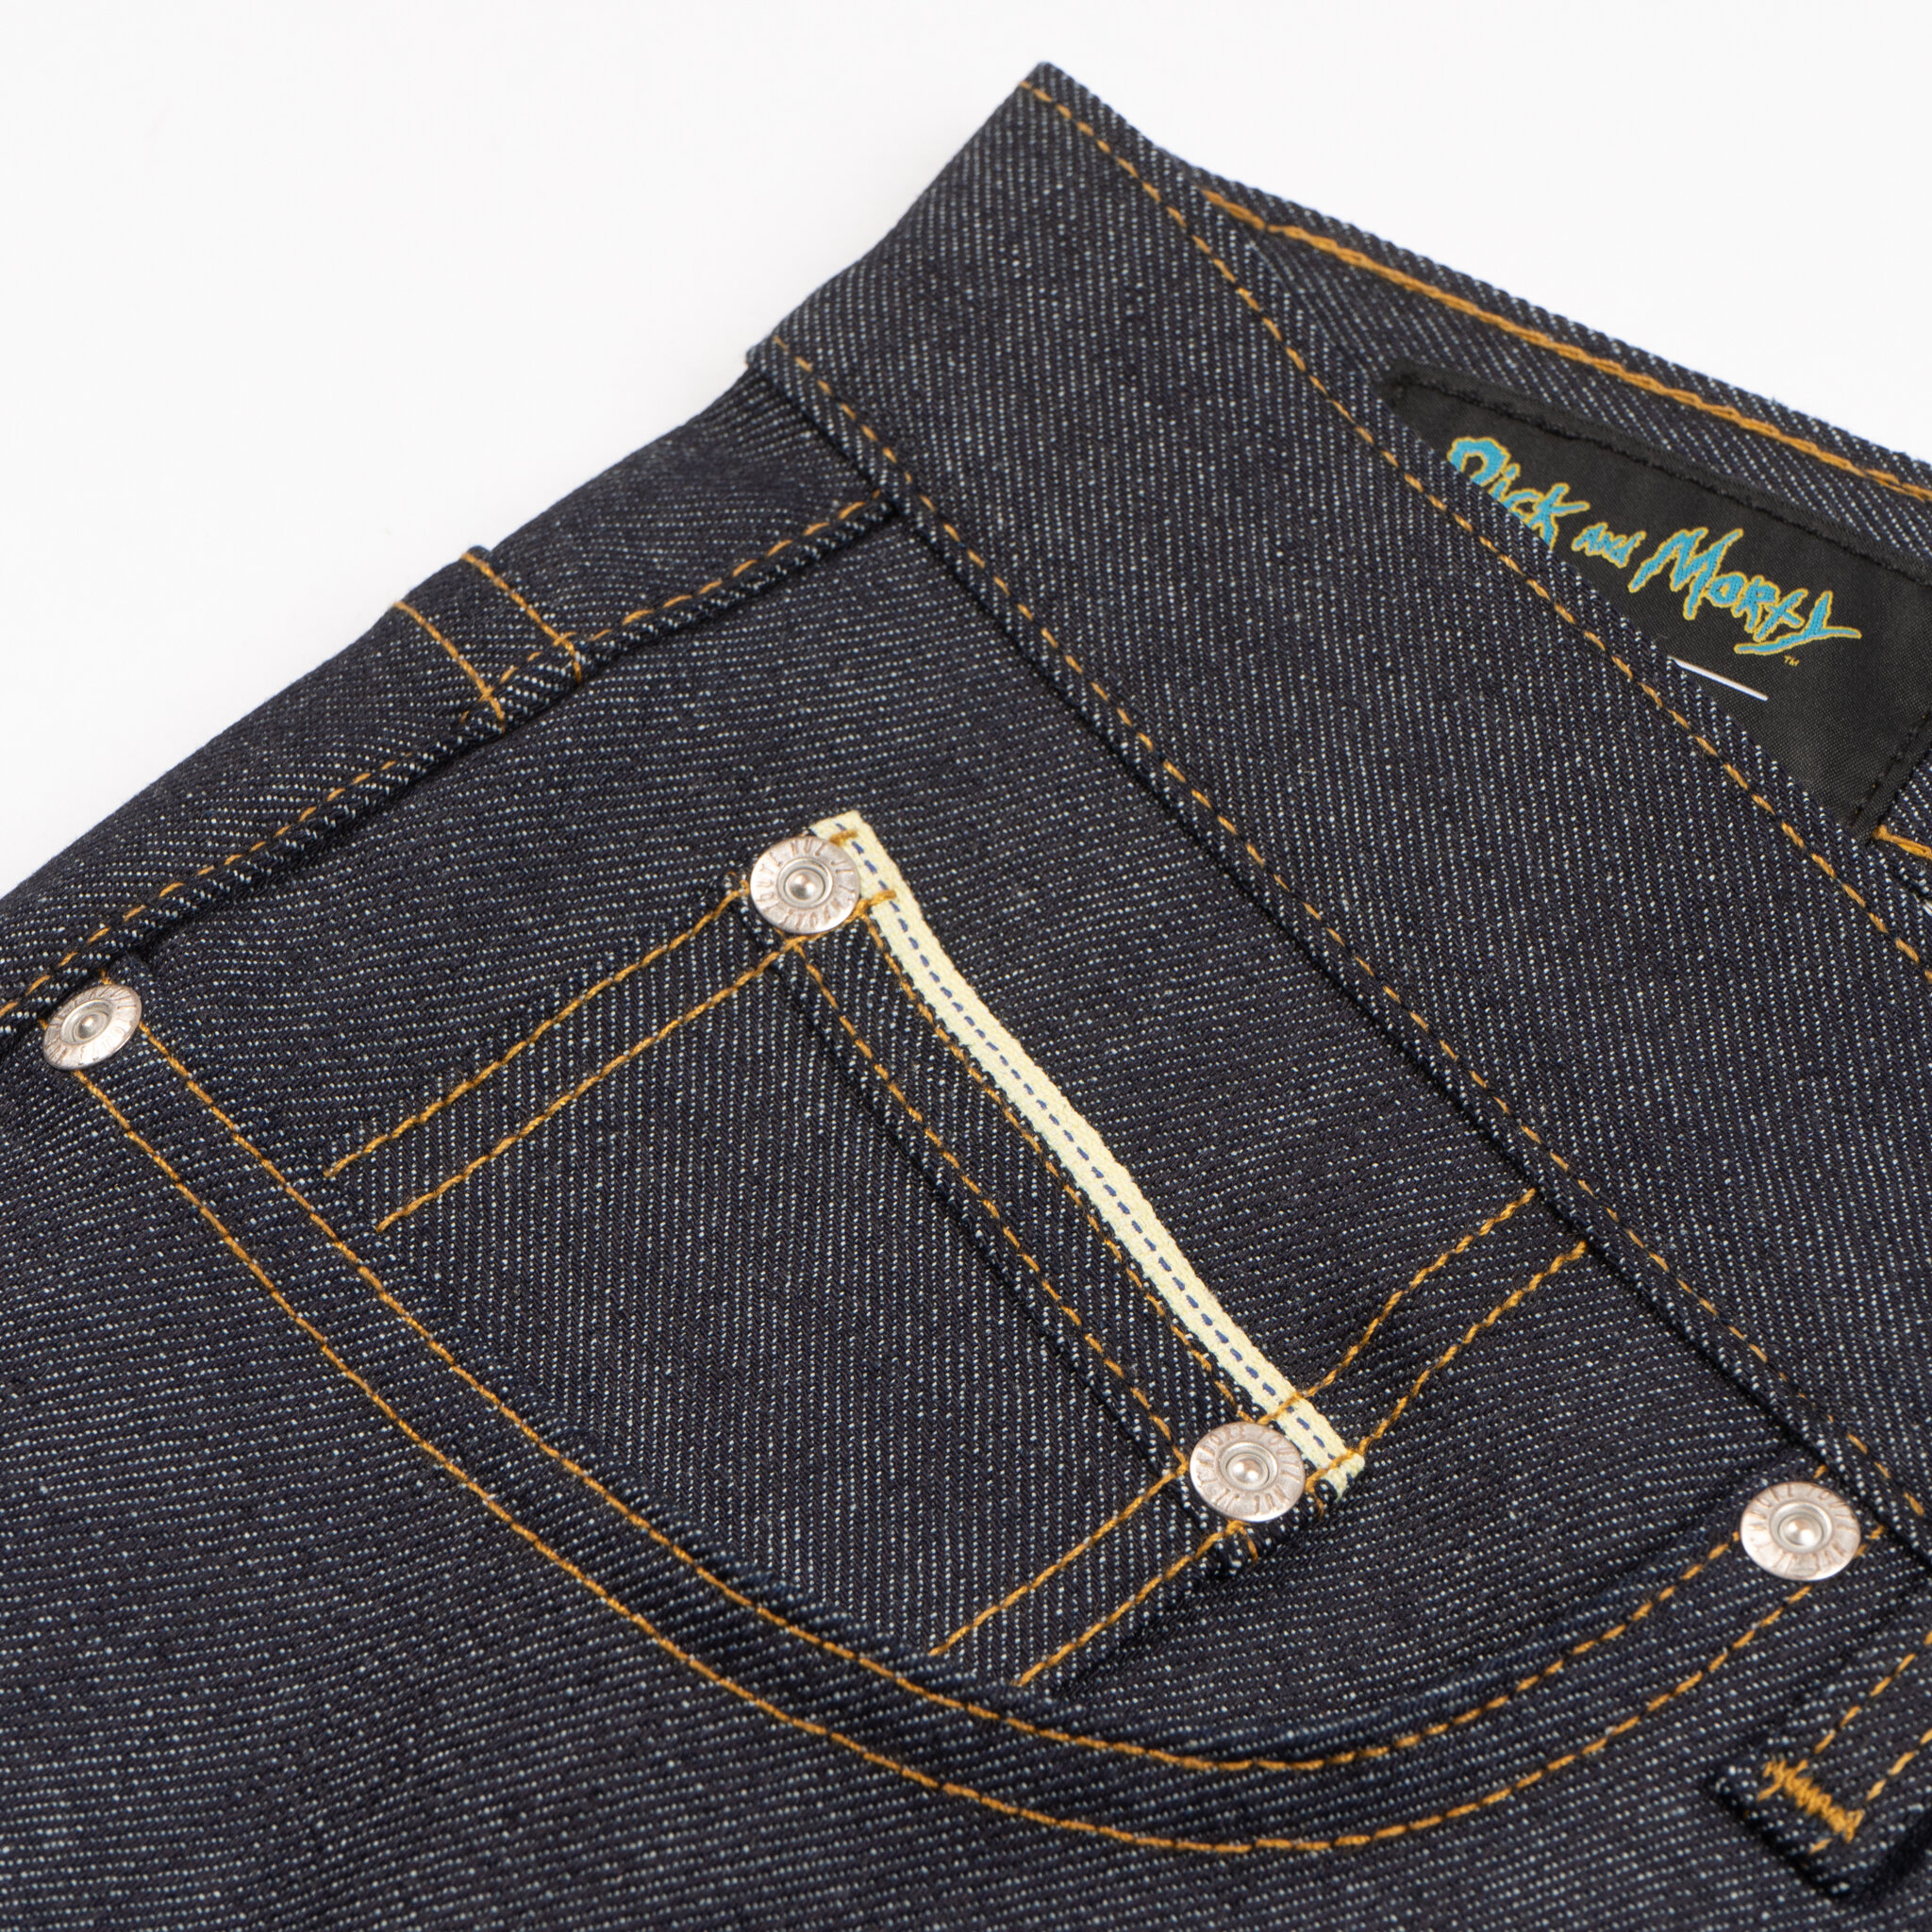  Morty Smith “Aww Geez” Selvedge jeans - coin pocket 